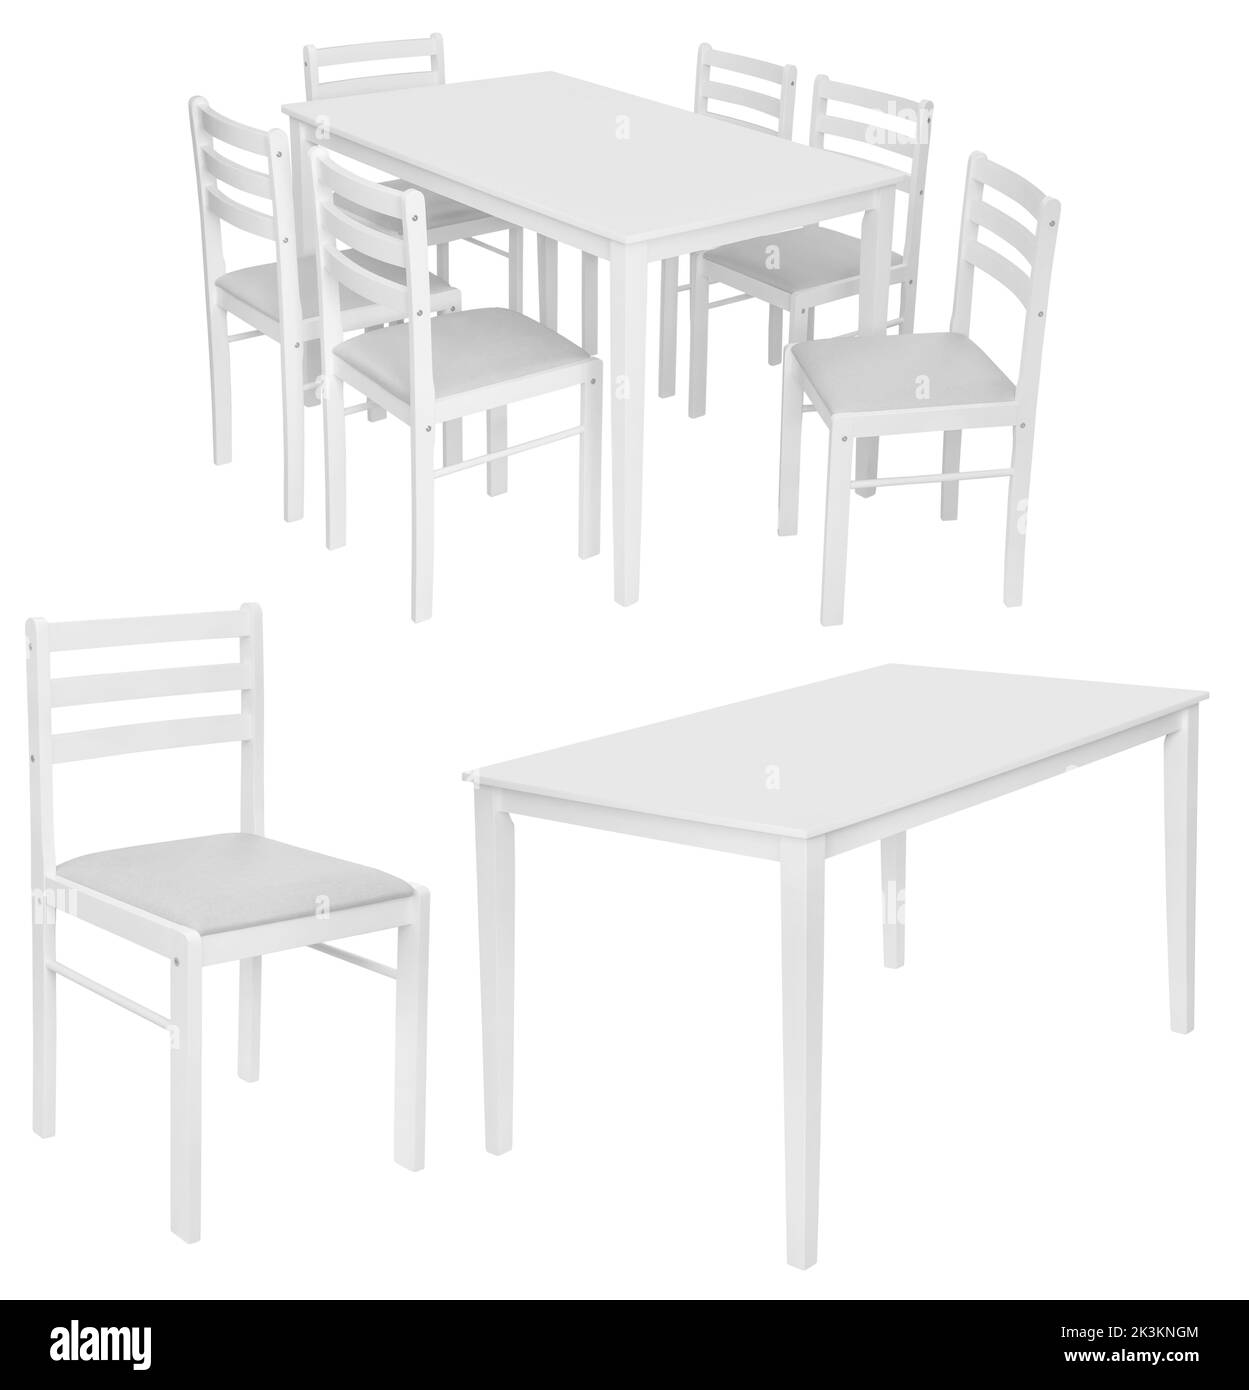 Kitchen furniture set of table and chairs. Isolated on a white background. Interior element Stock Photo